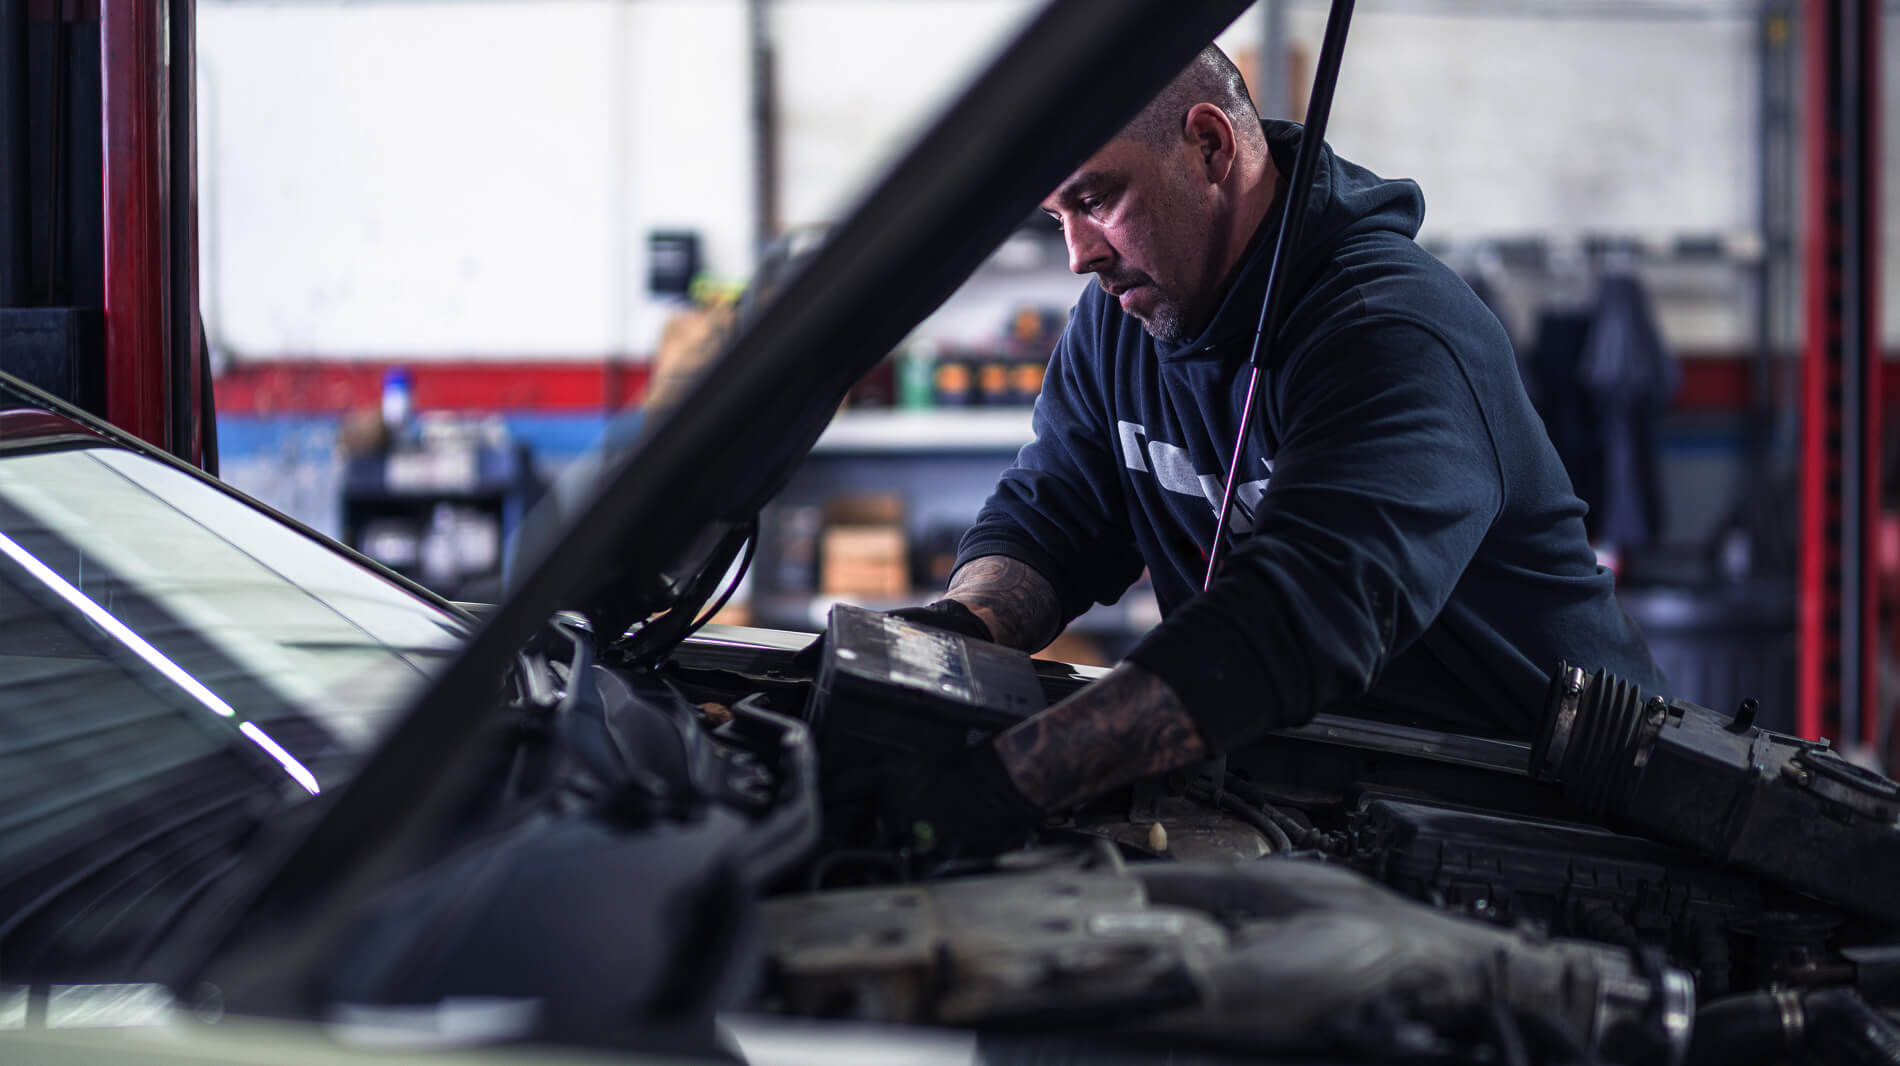 Mechanics offering battery testing & replacement – Midland mechanics offering reliable car servicing for Midland locals.